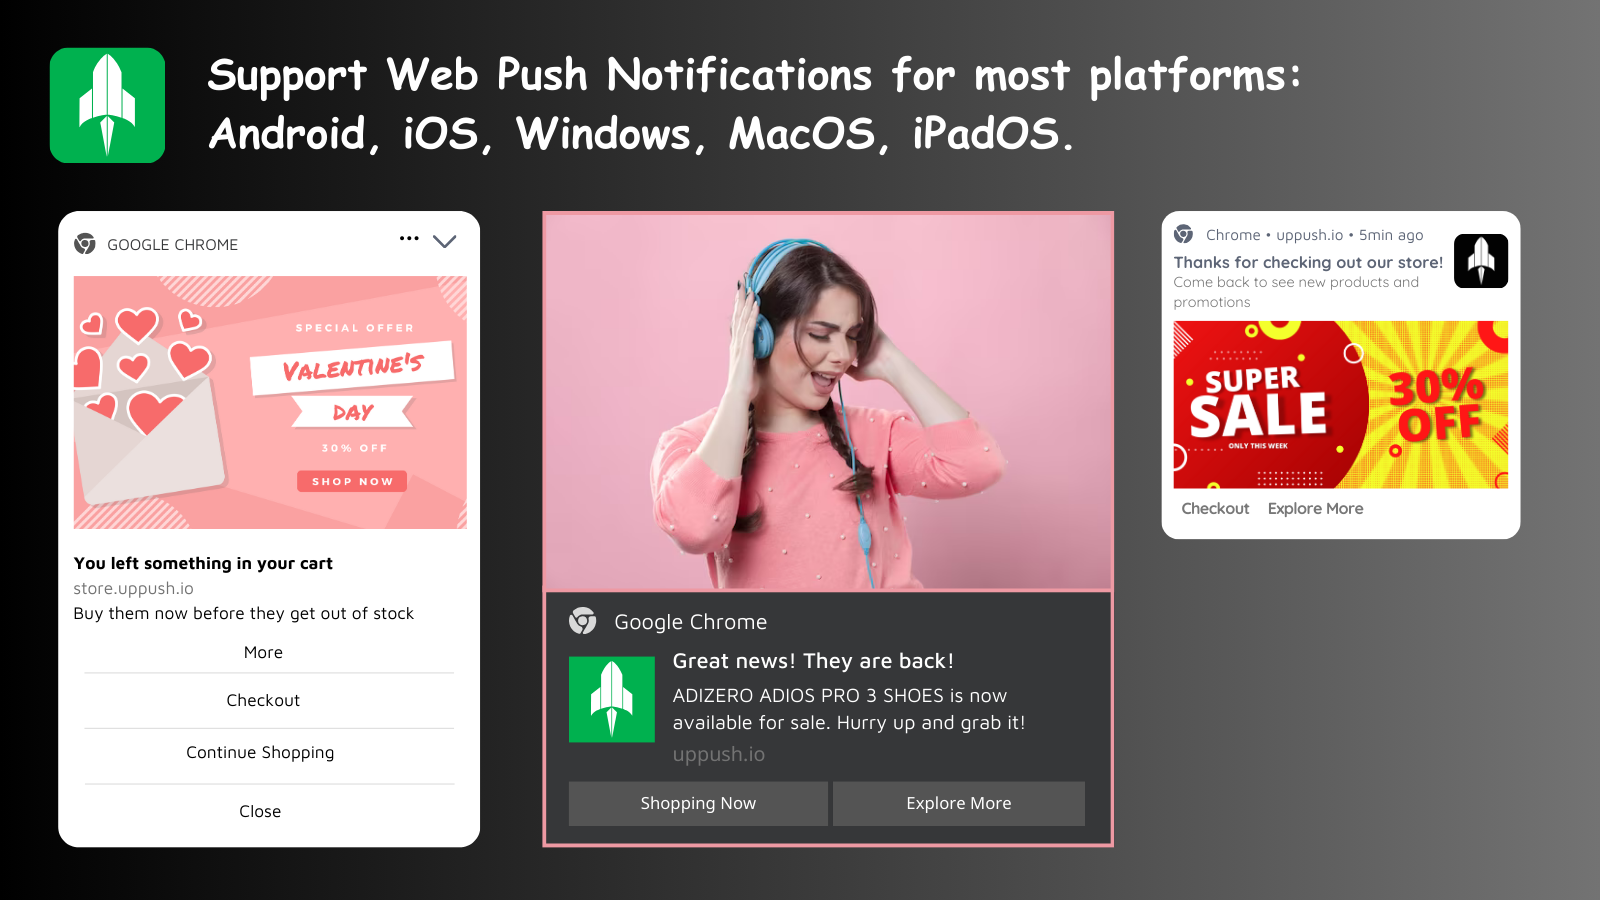 Support Web Push Notification for most platforms